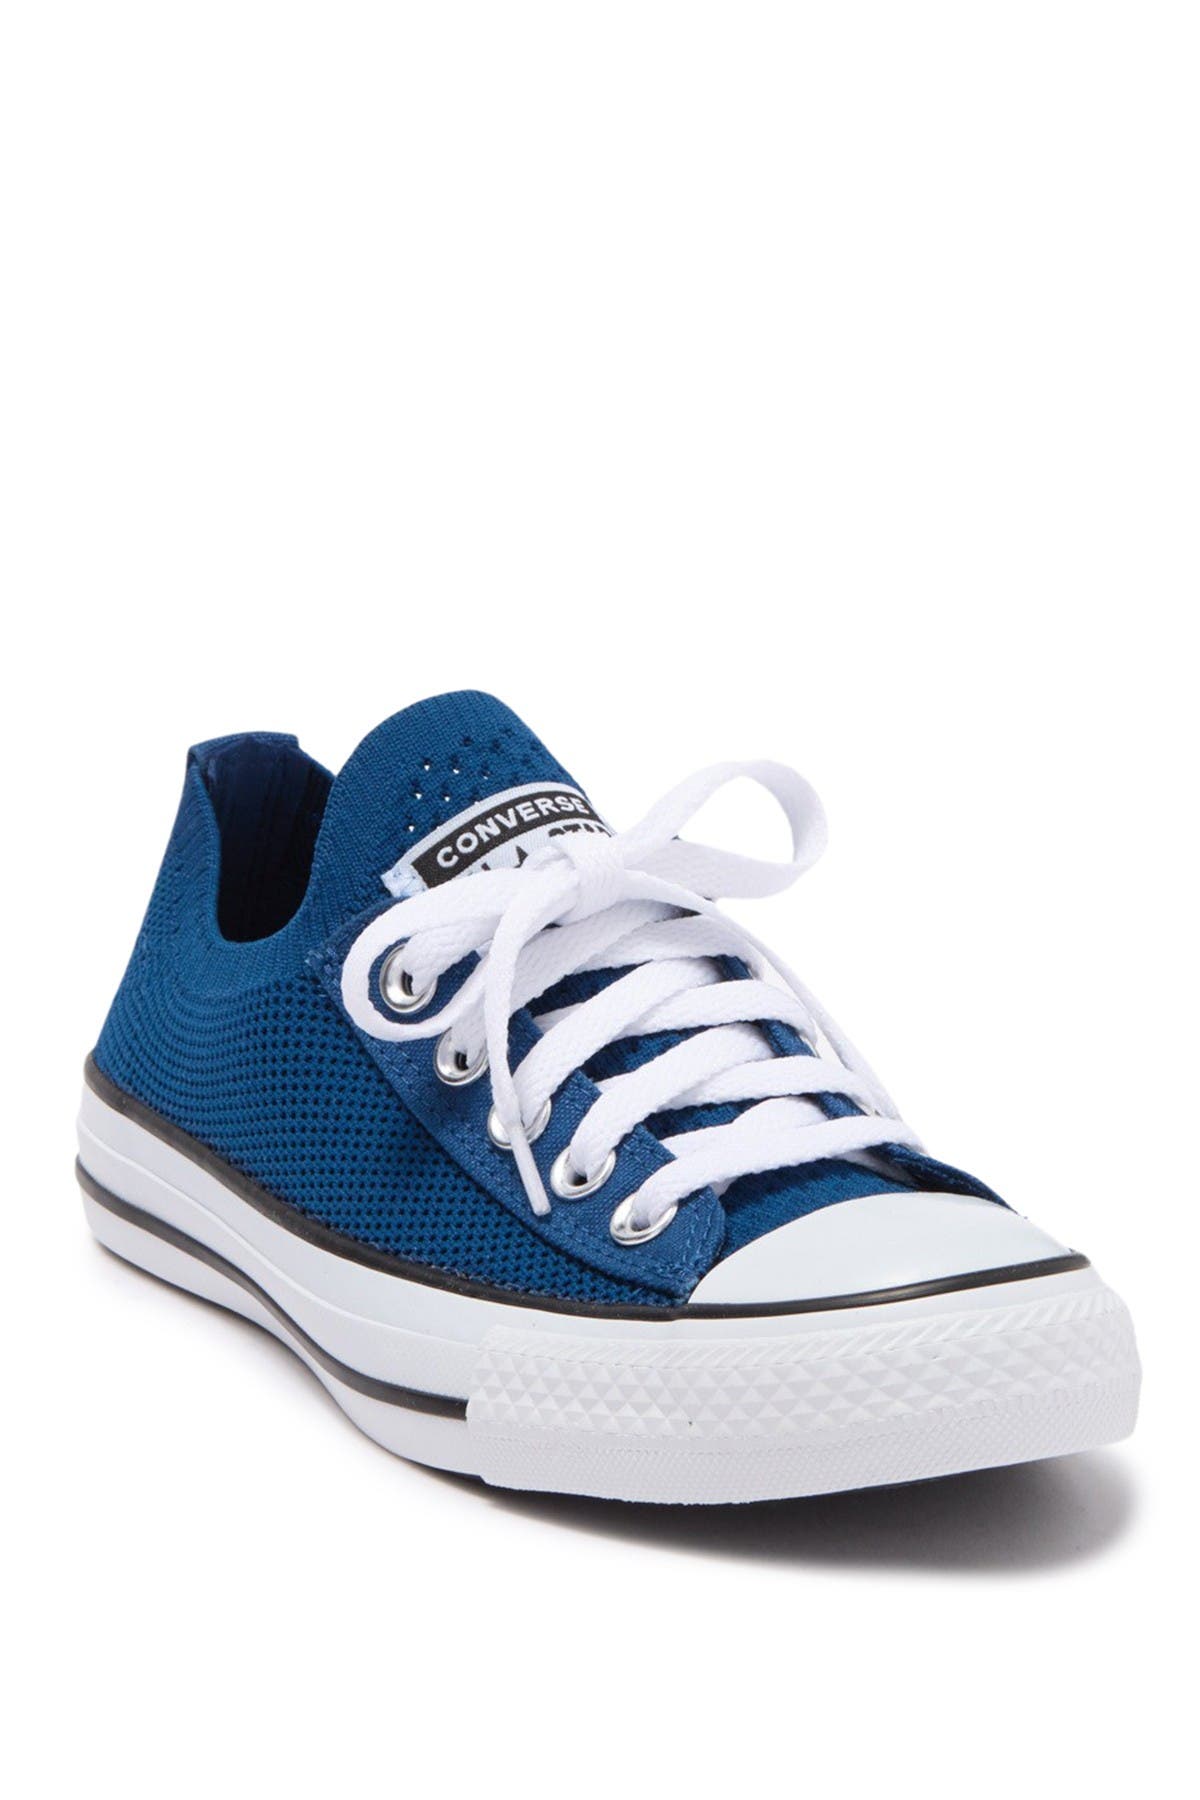 chuck taylor perforated